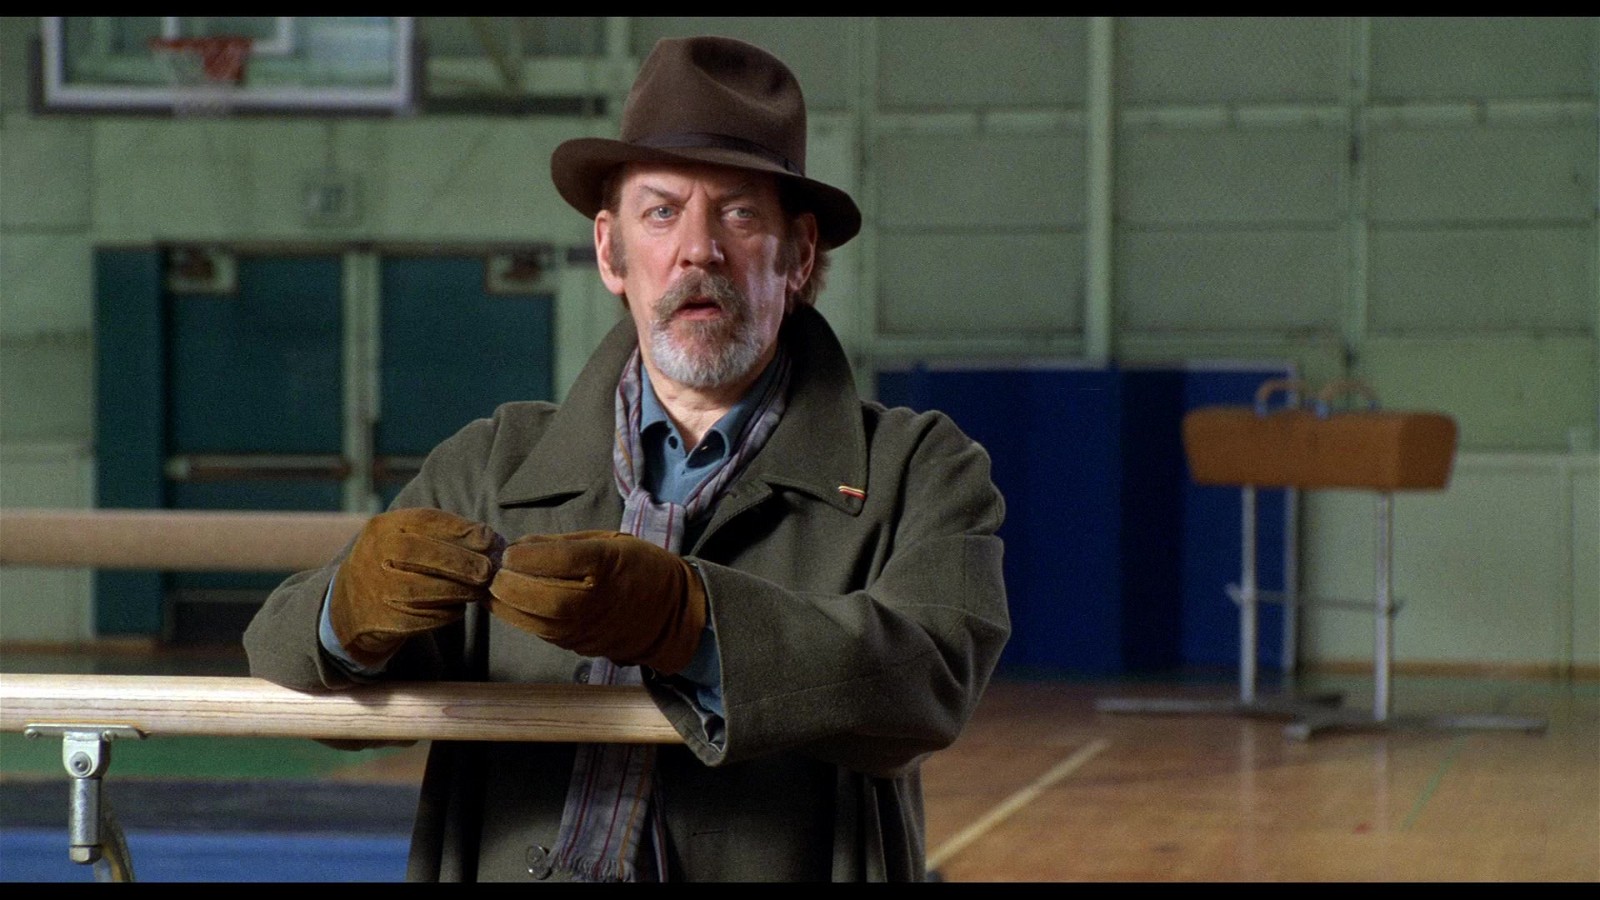 Donald Sutherland in the 1992 film version of Buffy the Vampire Slayer